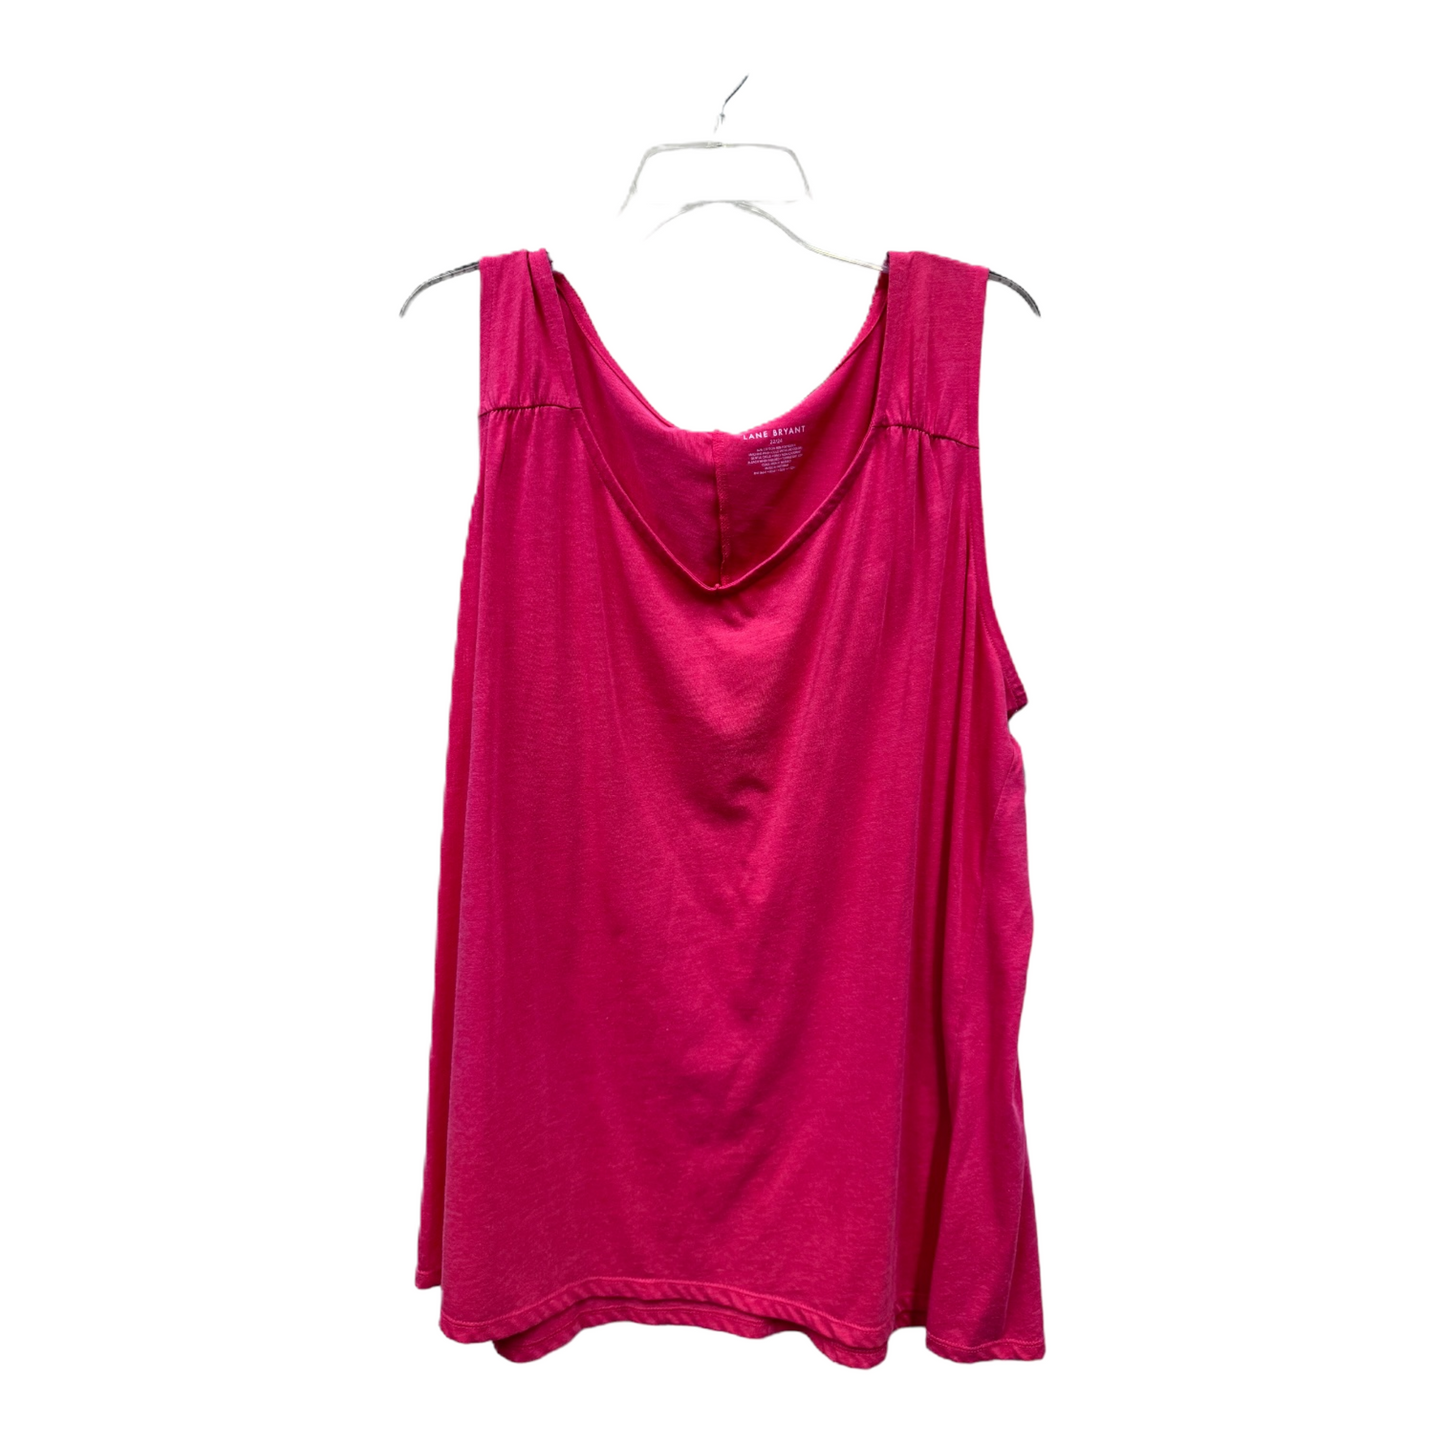 Pink Top Sleeveless By Lane Bryant, Size: 3x